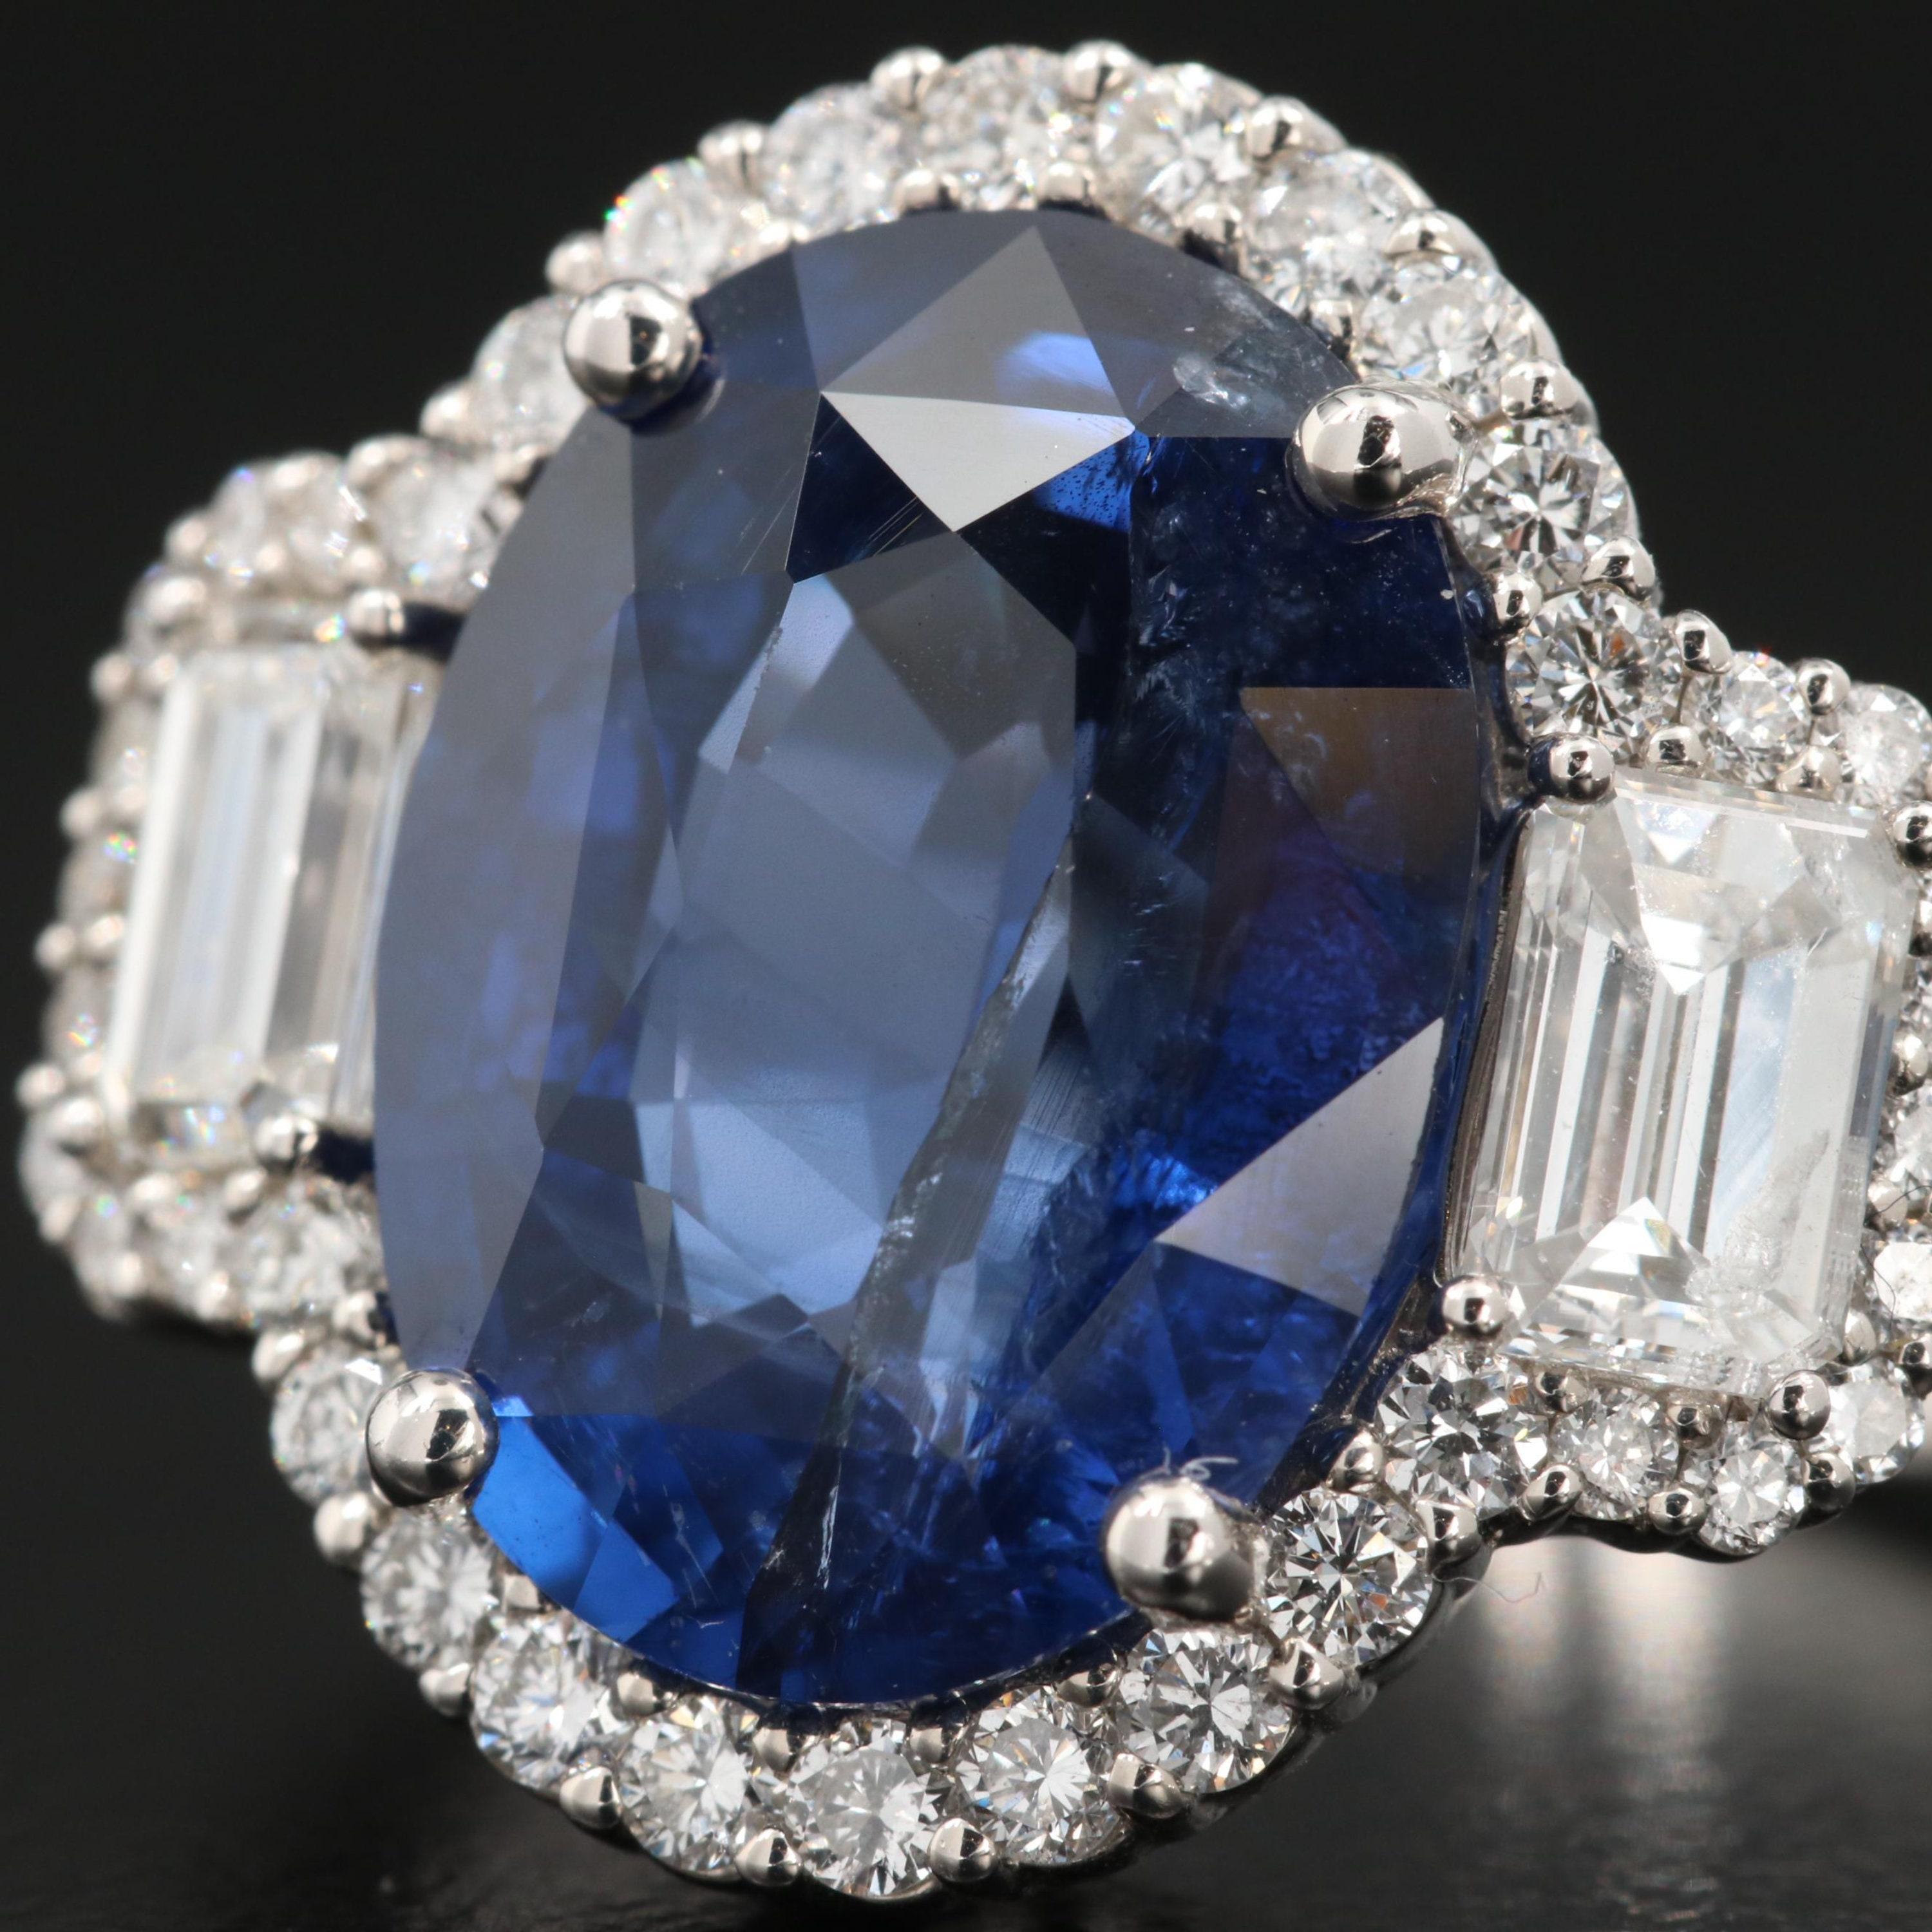 For Sale:  5 Carat Natural Sapphire Diamond Engagement Ring Set in 18K Gold, Cocktail Ring 2